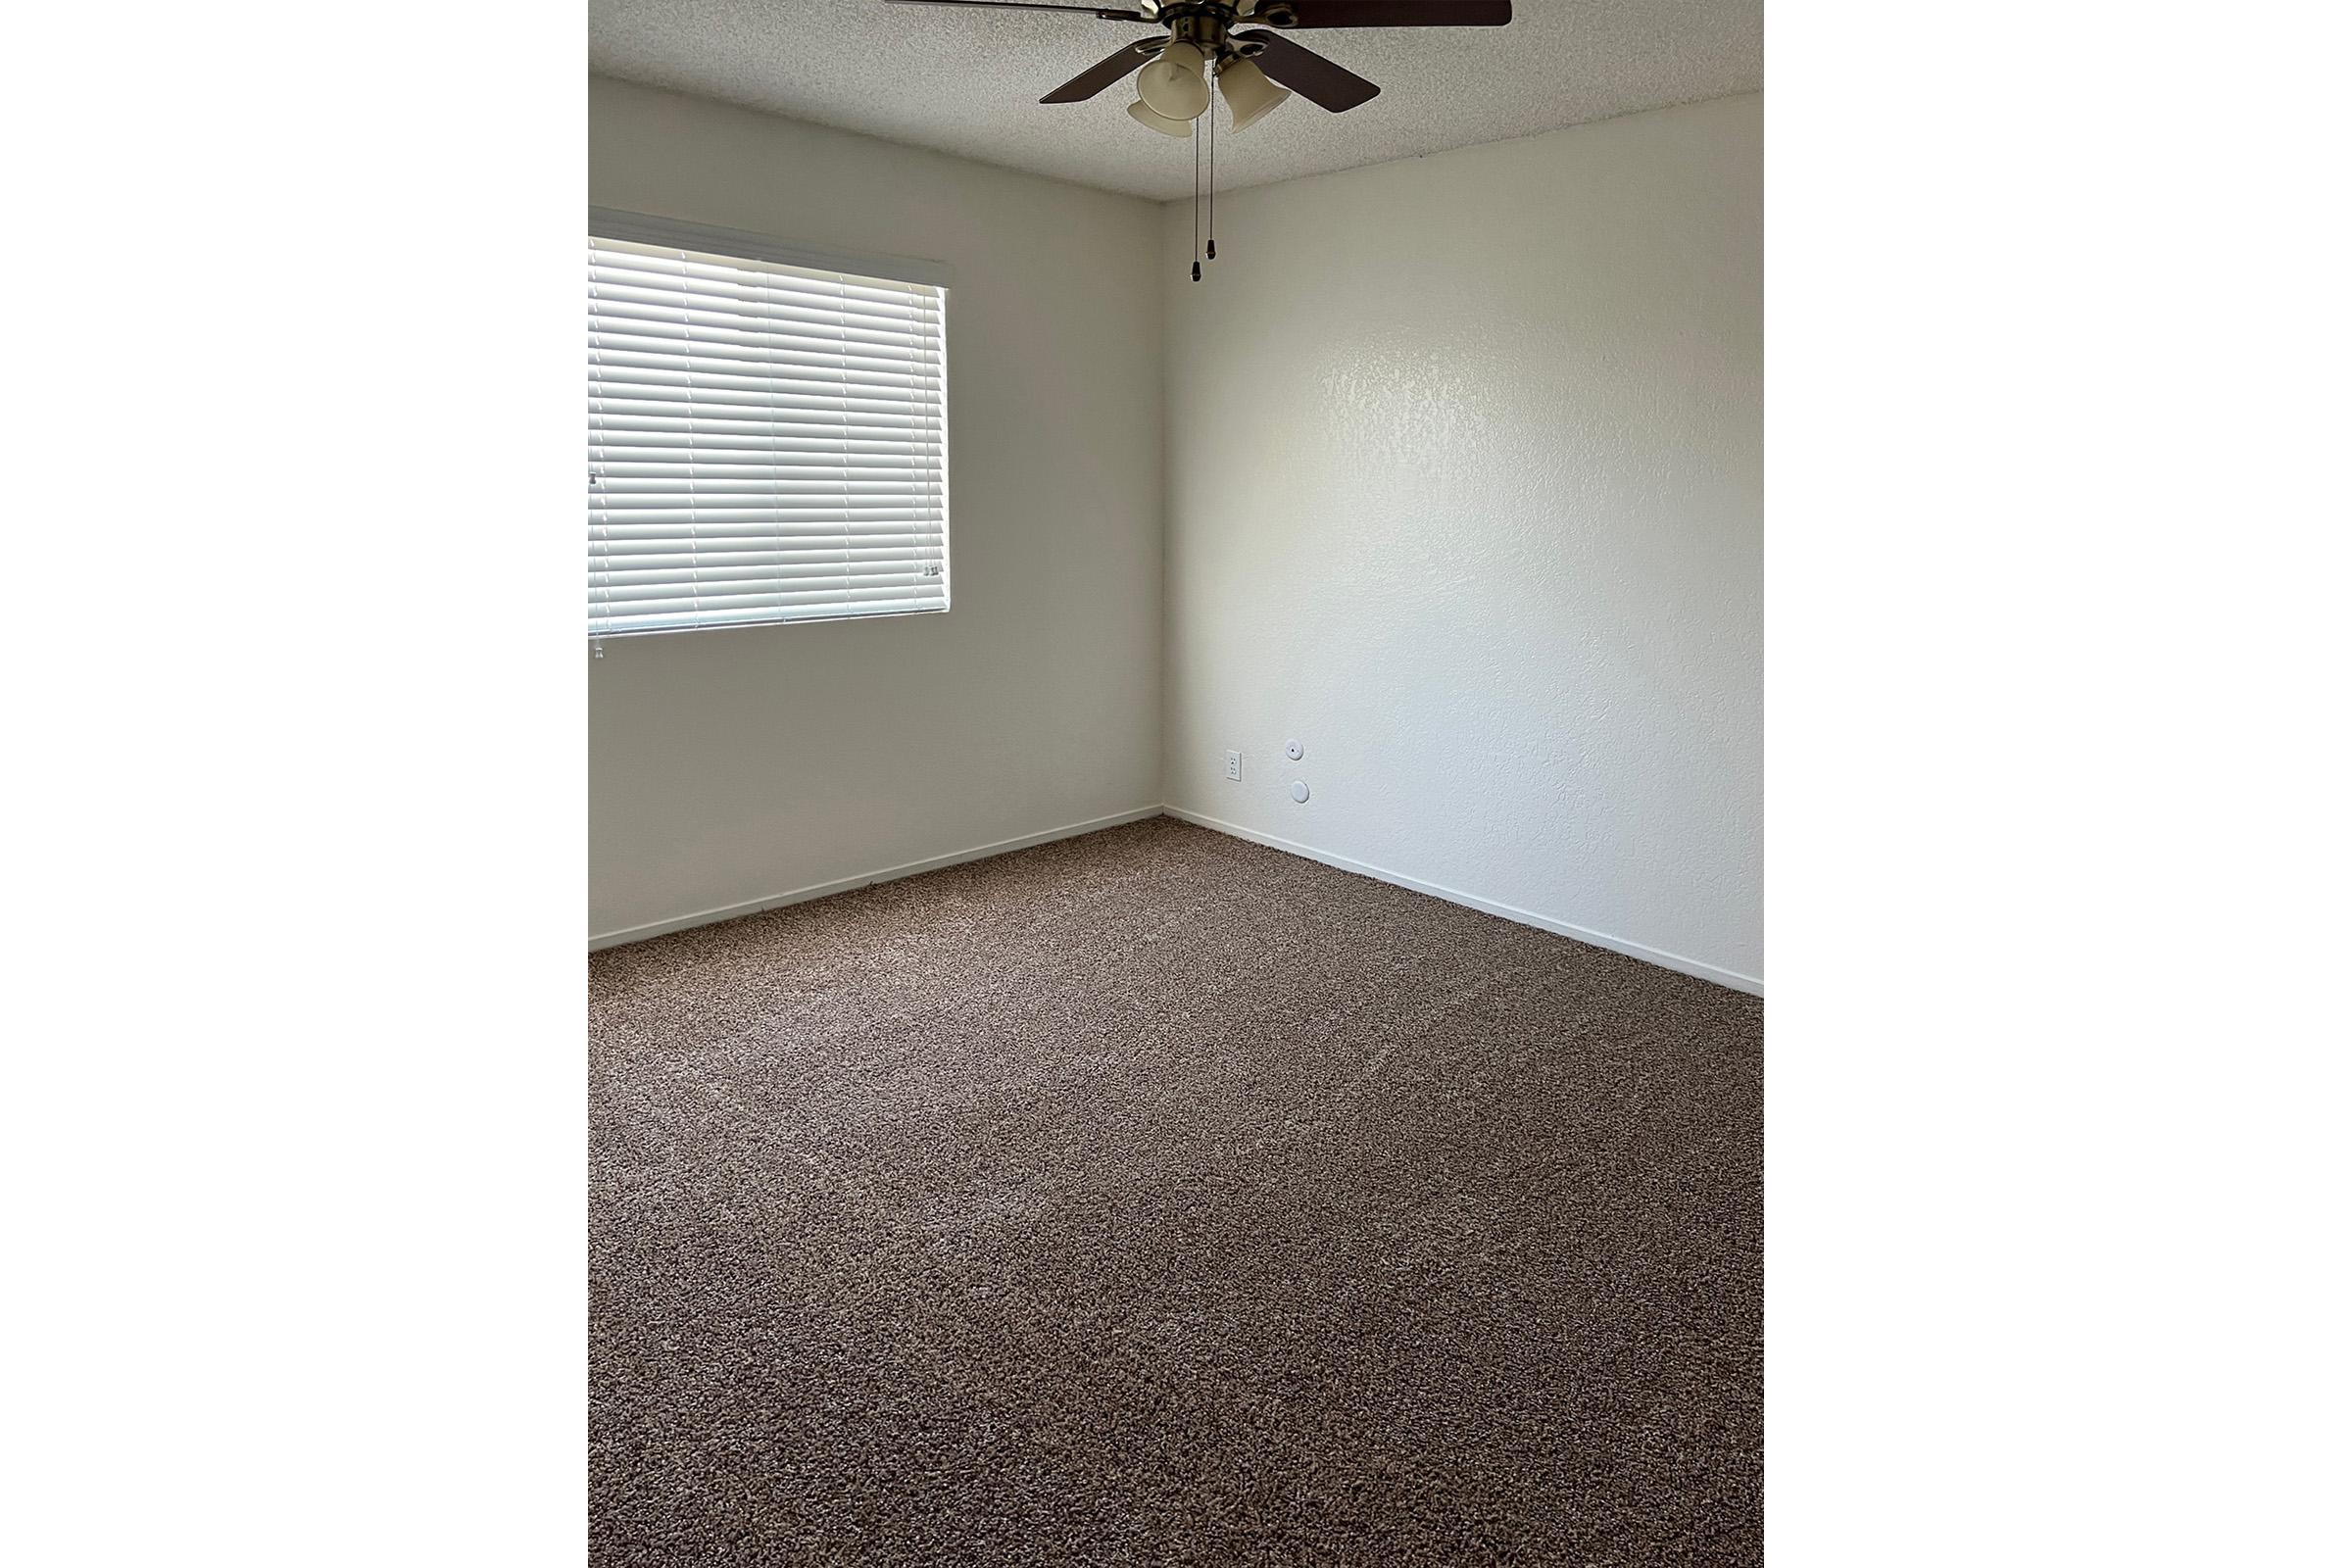 Vacant carpeted bedroom with a ceiling fan